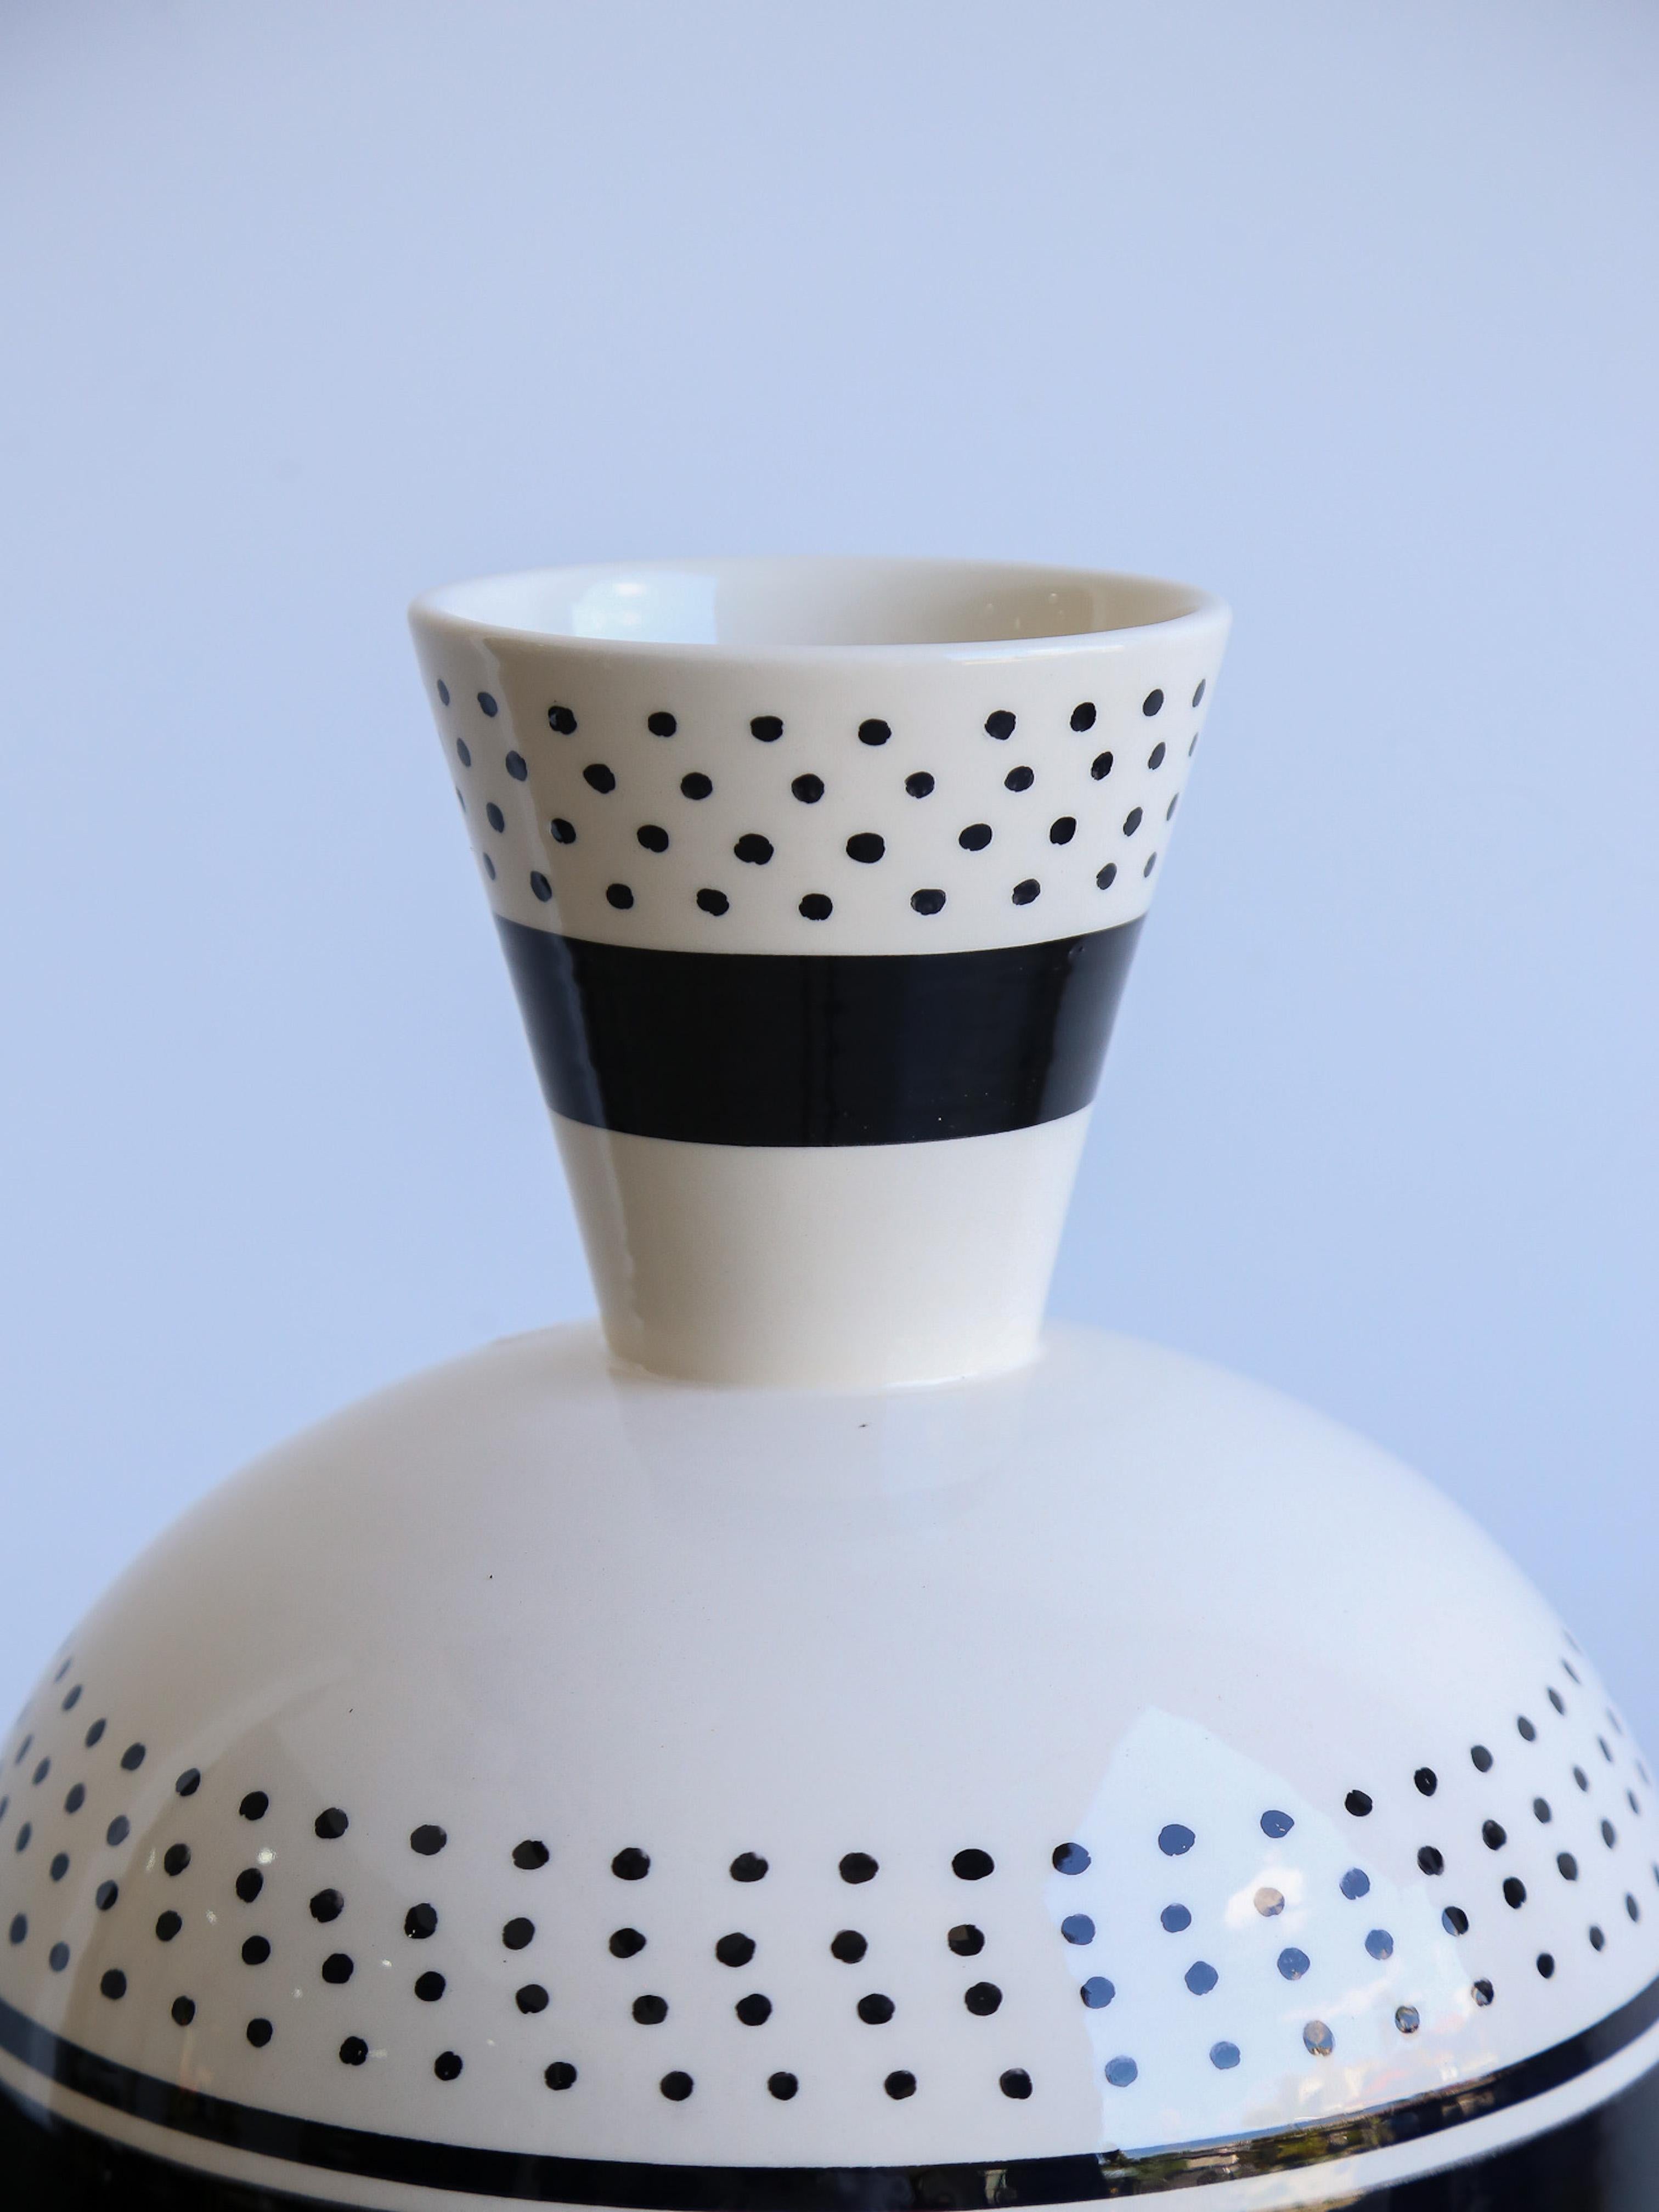 Conical and spheroidal vases play with lines and crosses in a black and white ritual. Clay vase, hand thrown. White engobe finish decorated black with a transparent glaze.

Ugo La Pietra is an Italian artist, designer, and architect born in 1938.